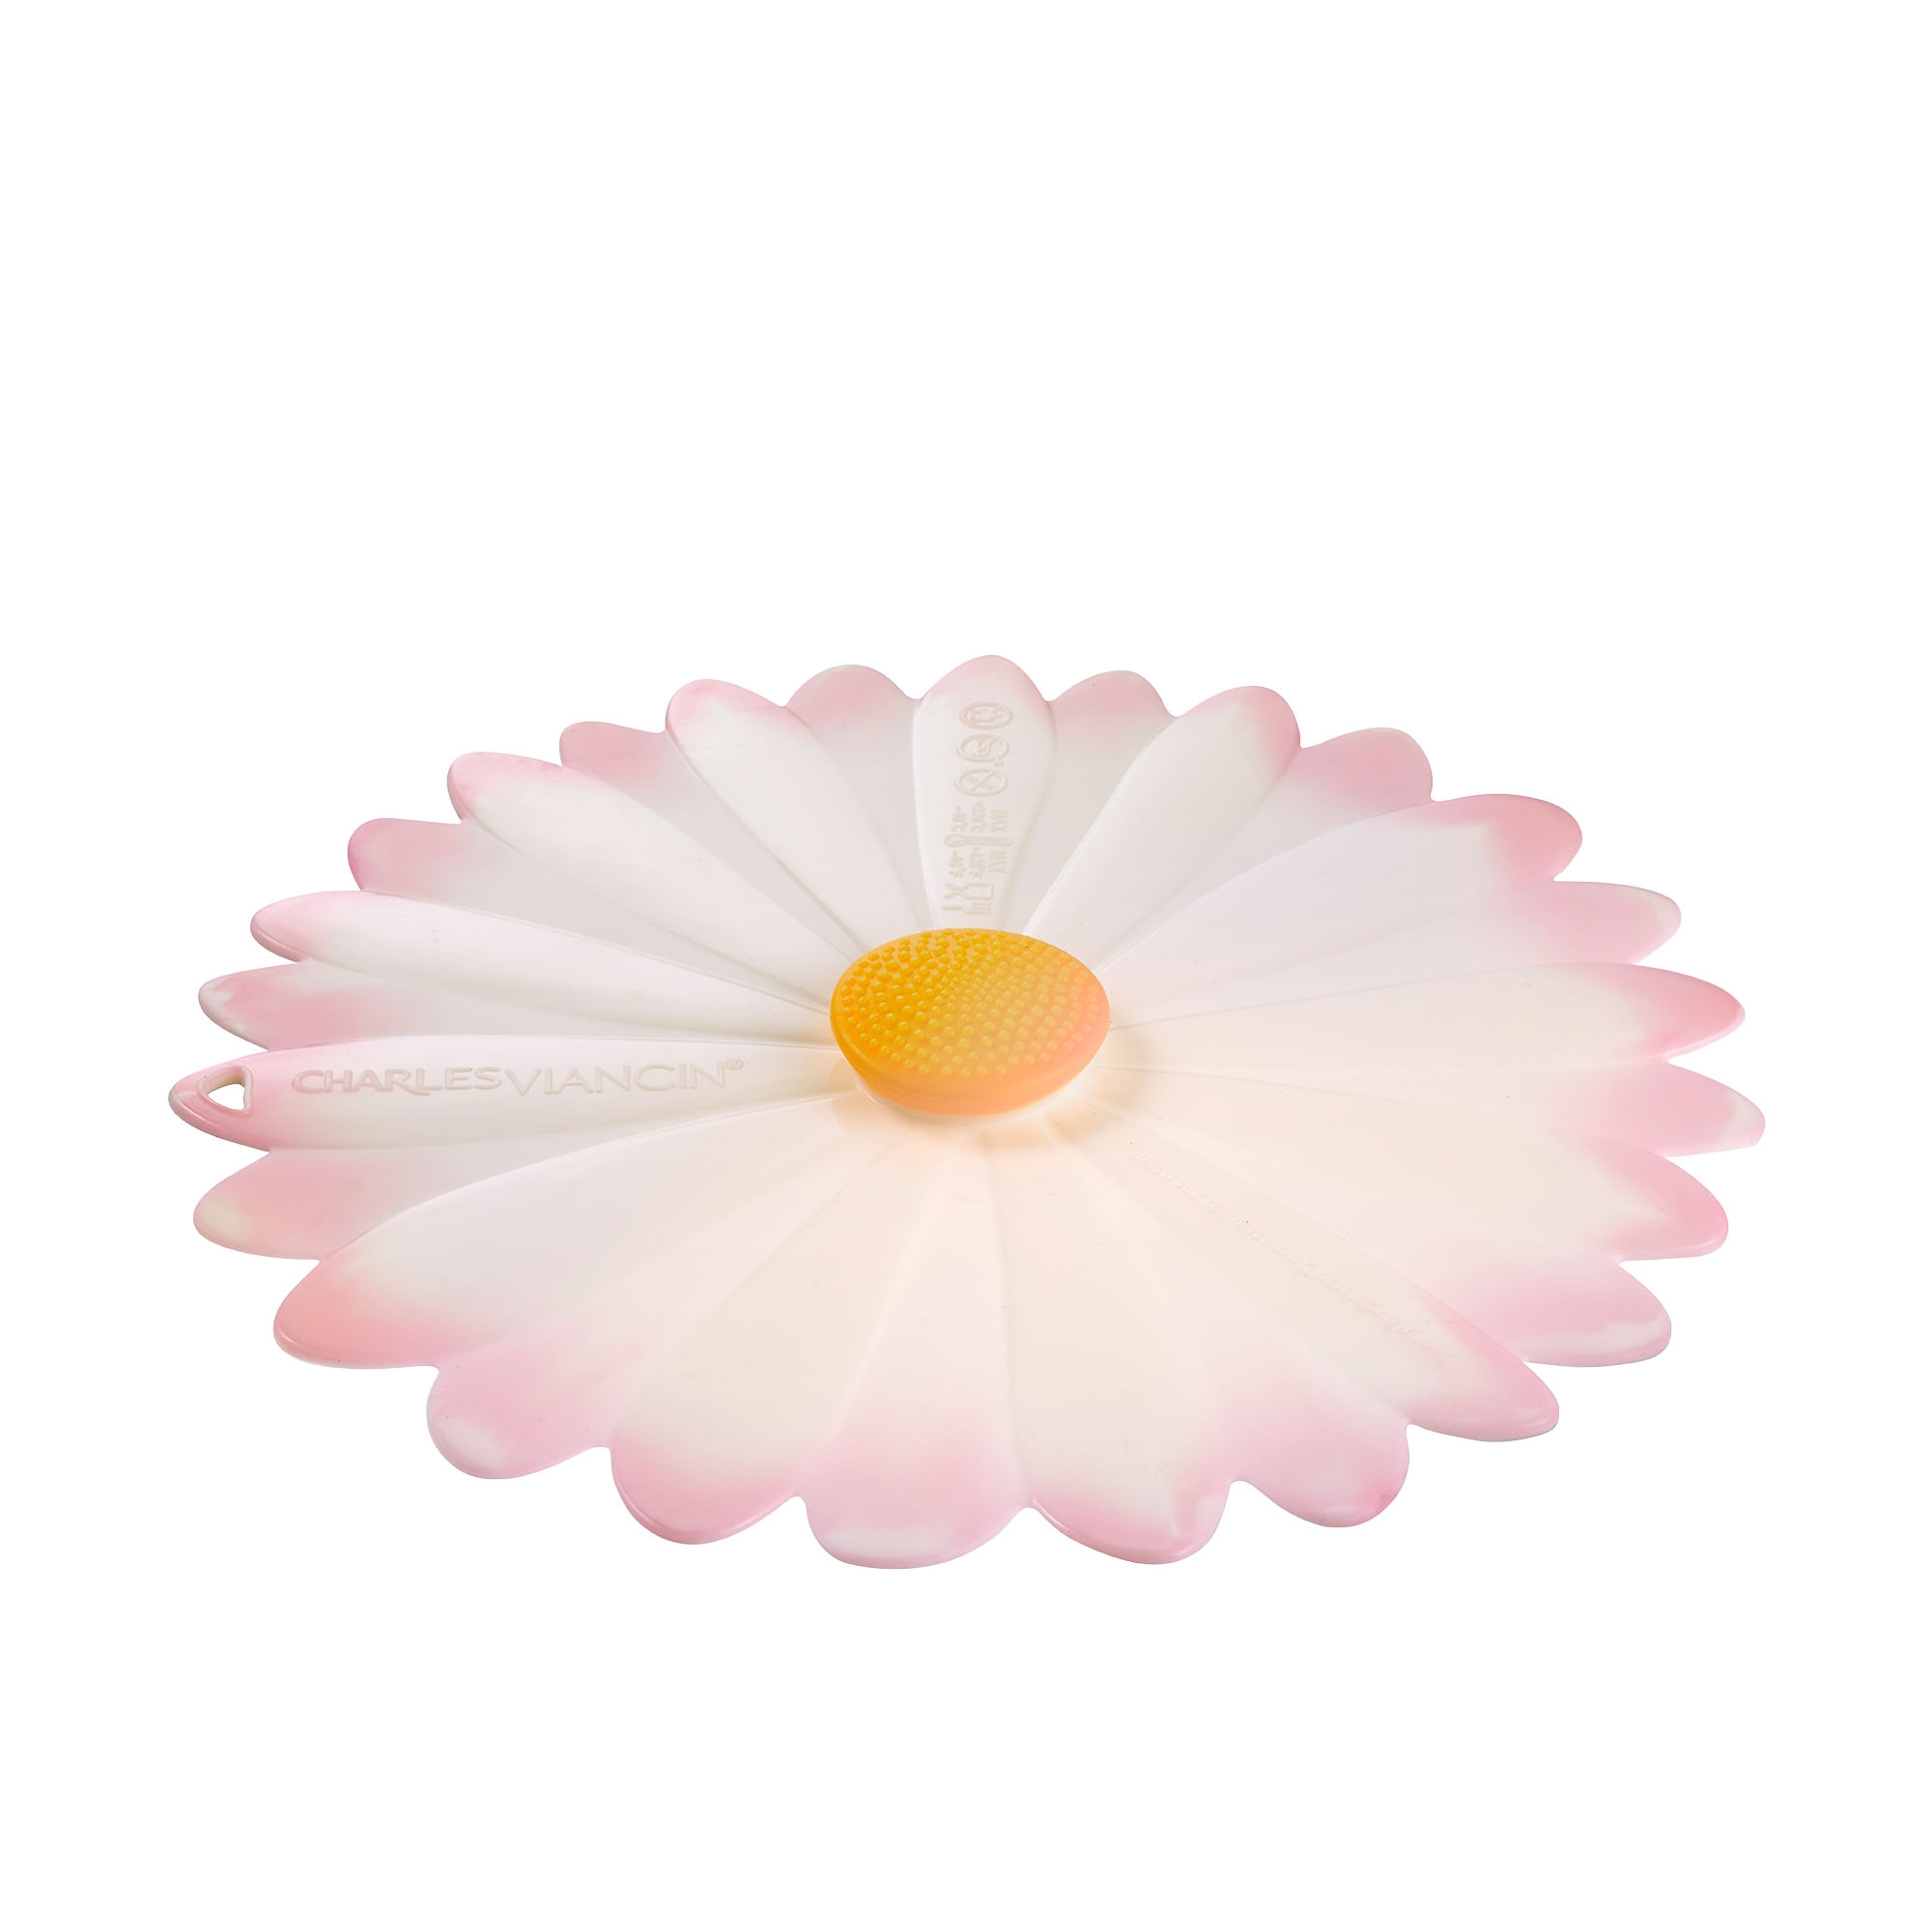 Charles Viancin Daisy Silicone Lid 23cm White Image 1